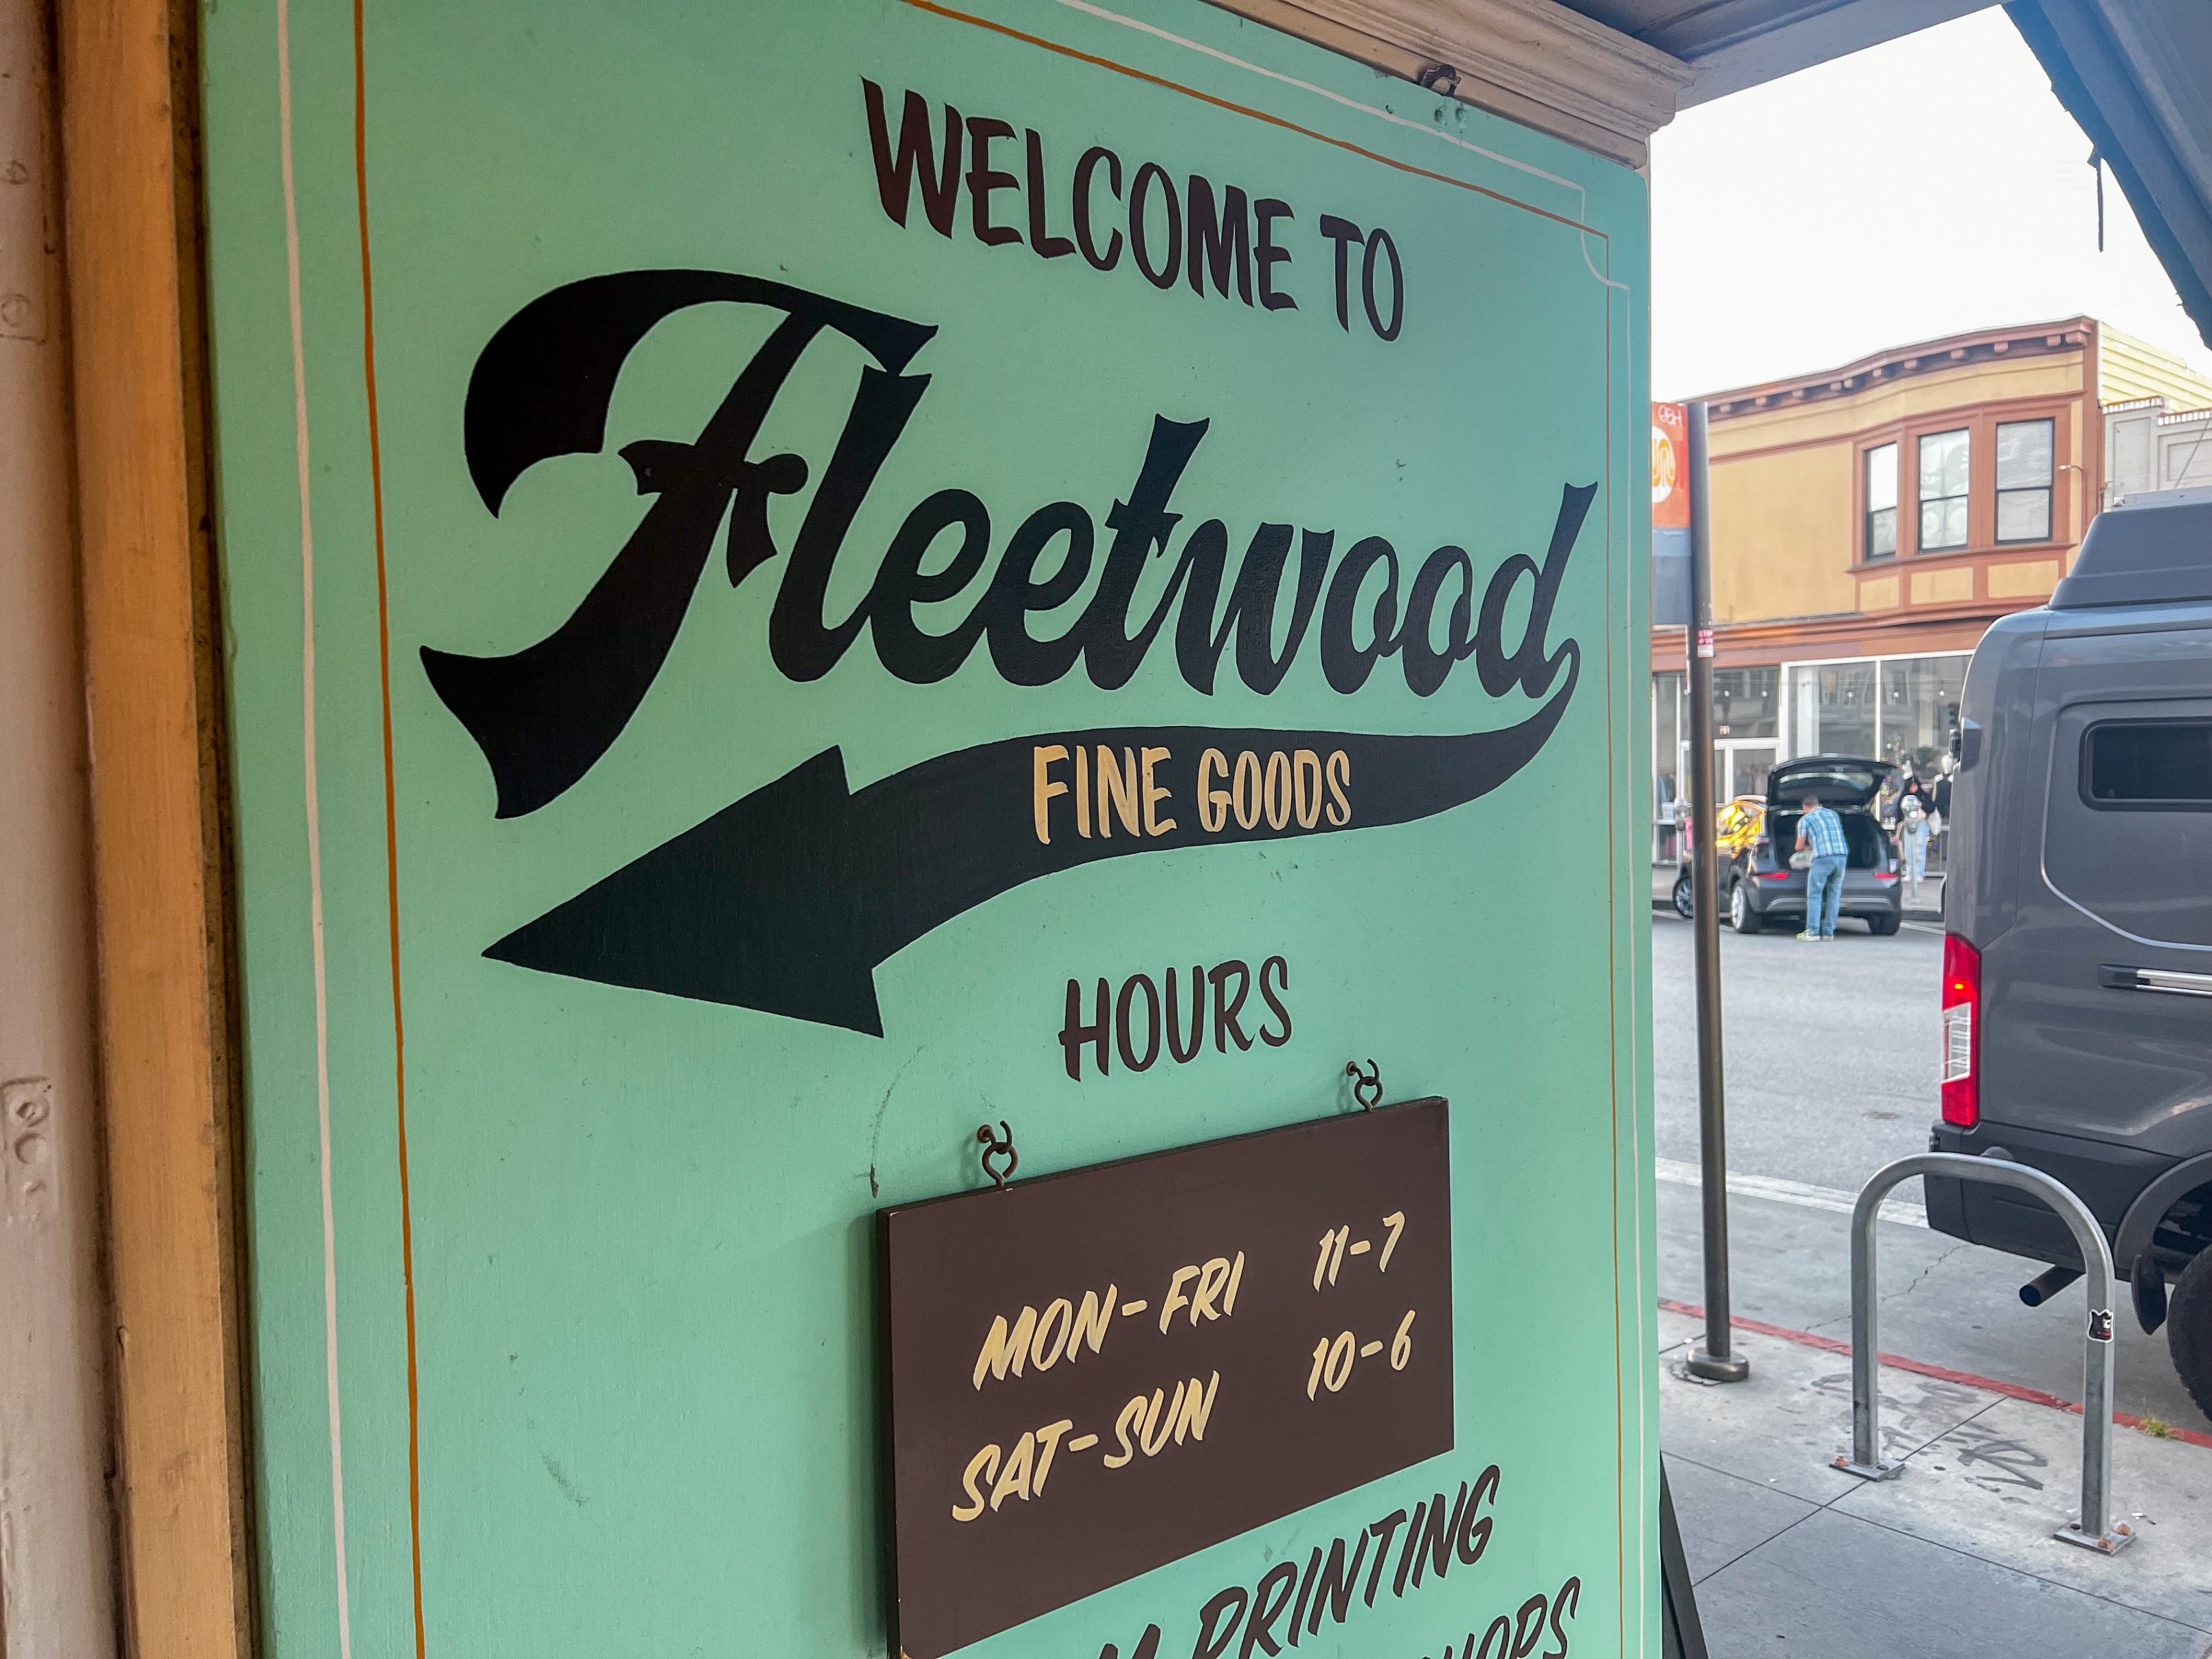 Signage for Fleetwood clothing store is displayed in San Francisco